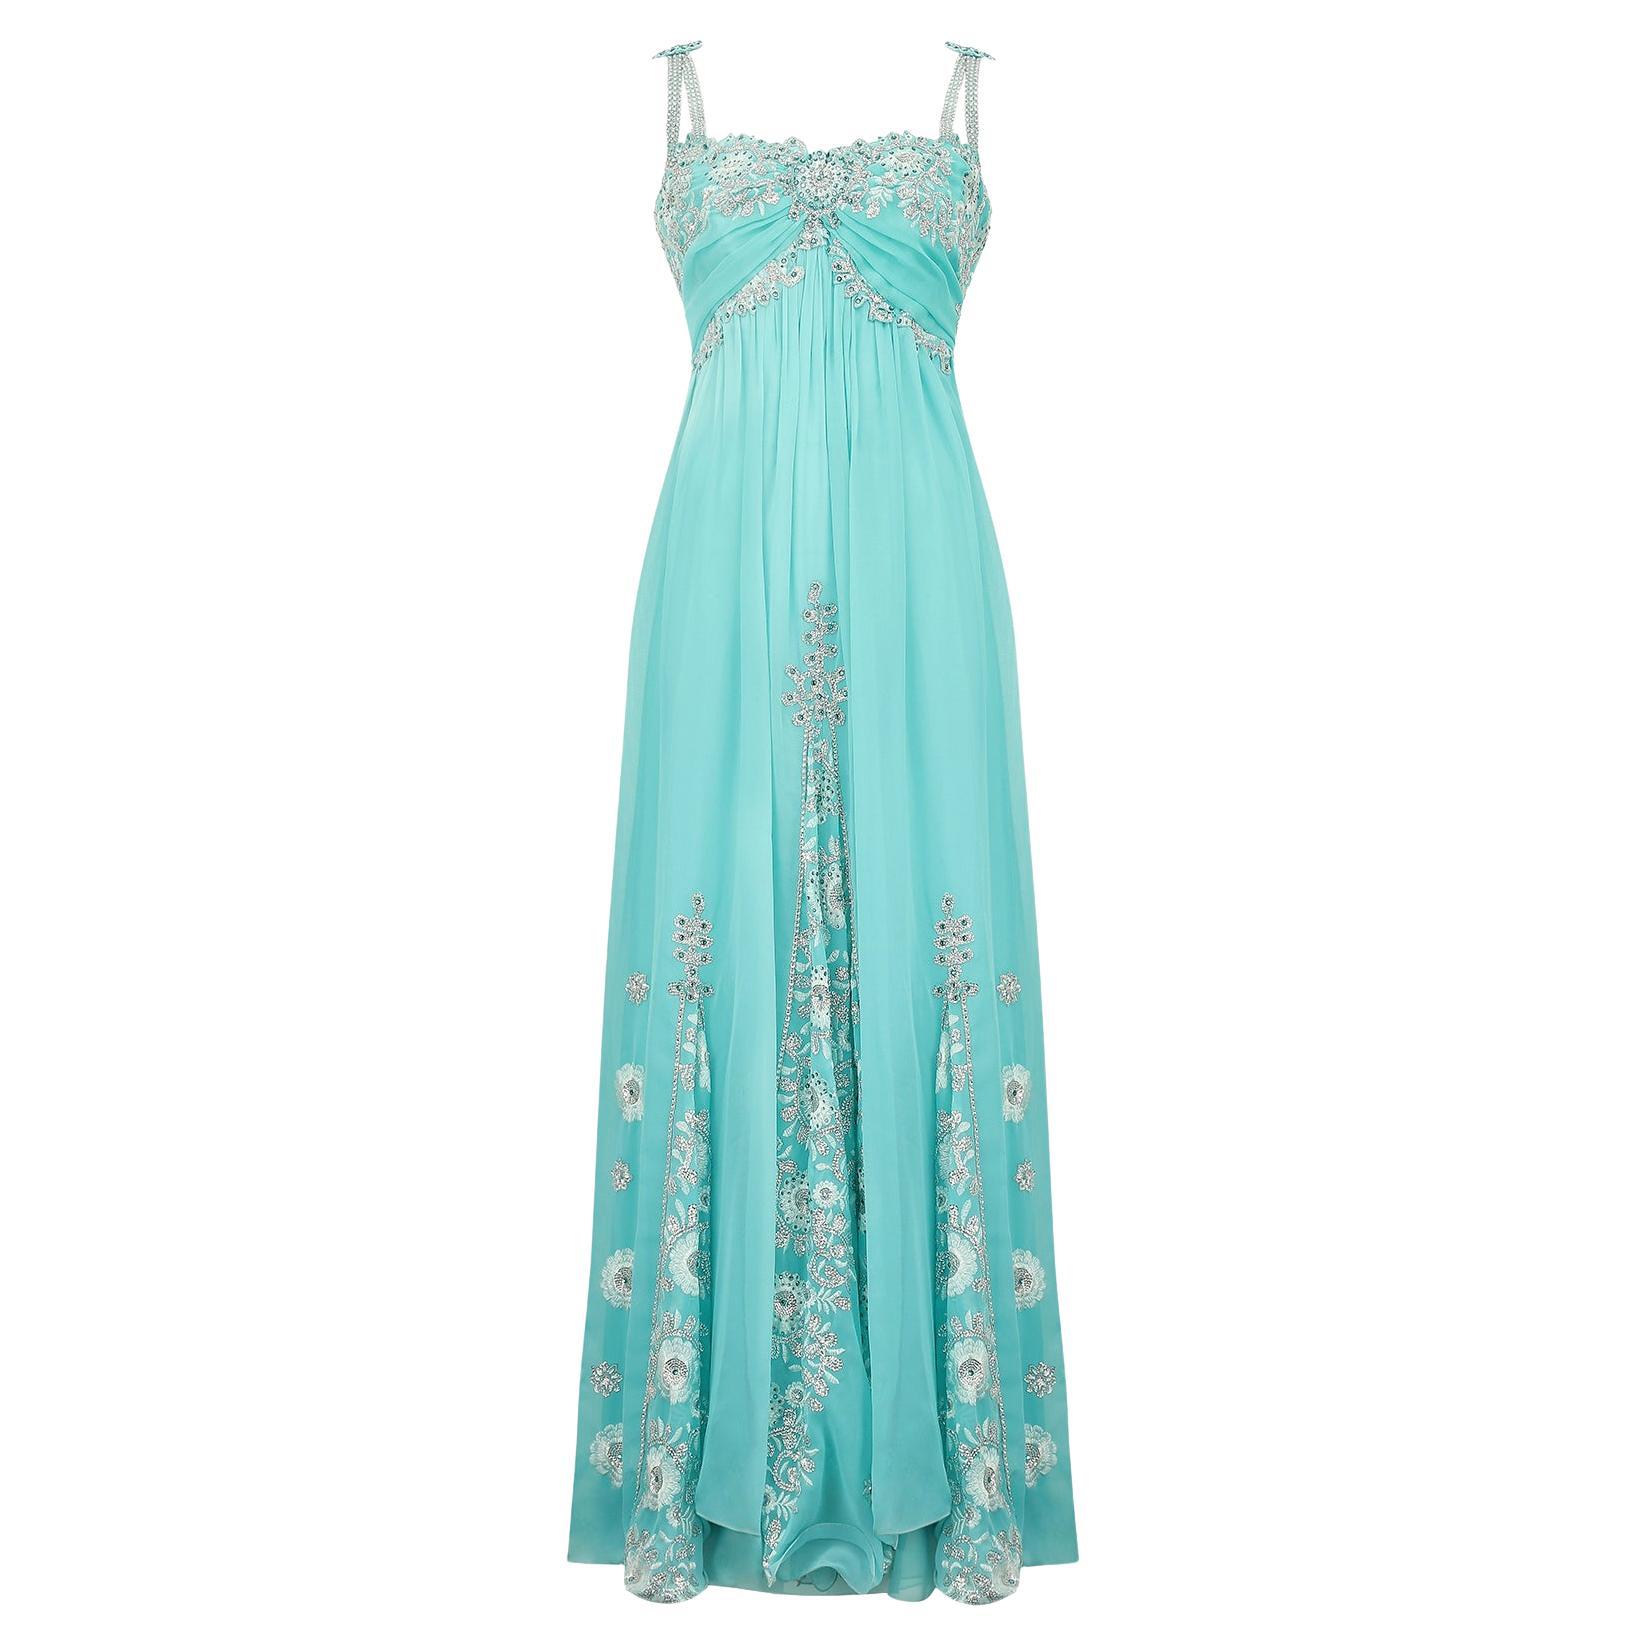 1990s Bespoke Turquoise Sequinned and Embroidered Dress